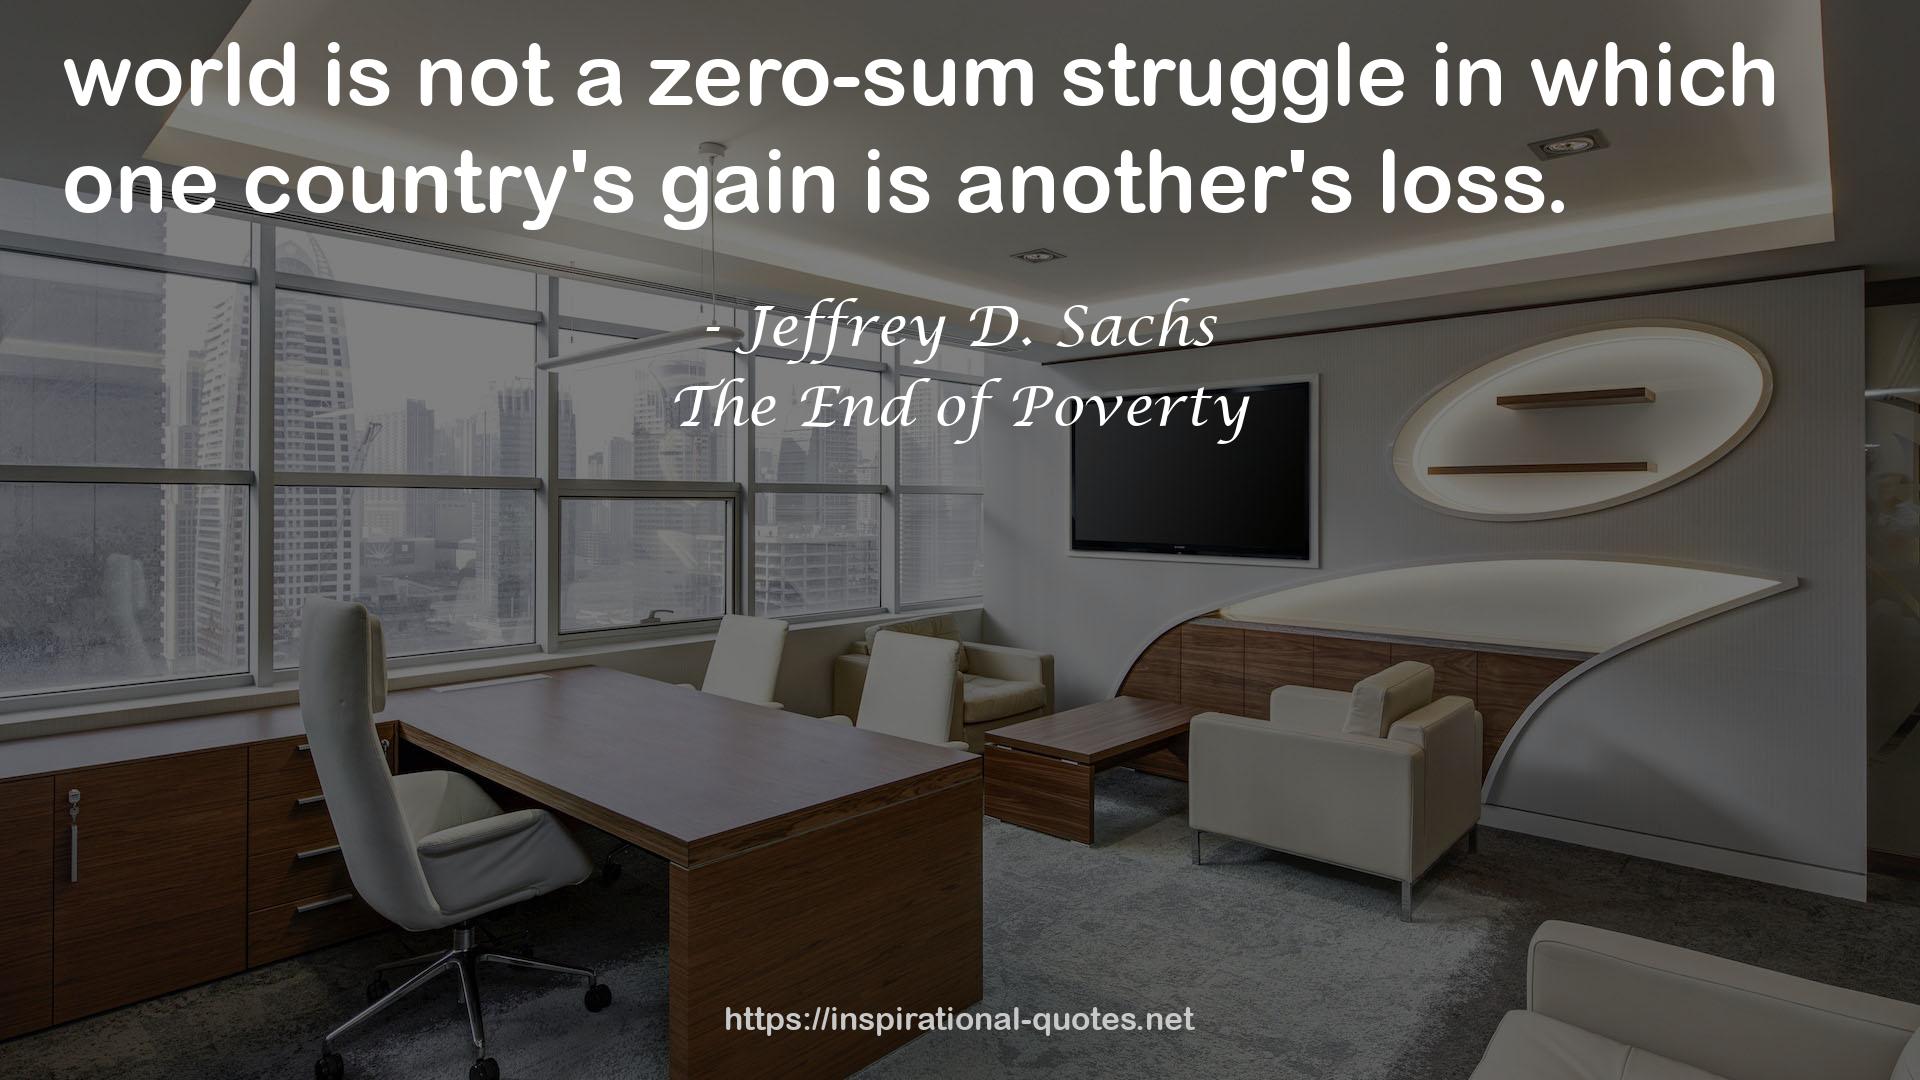 The End of Poverty QUOTES